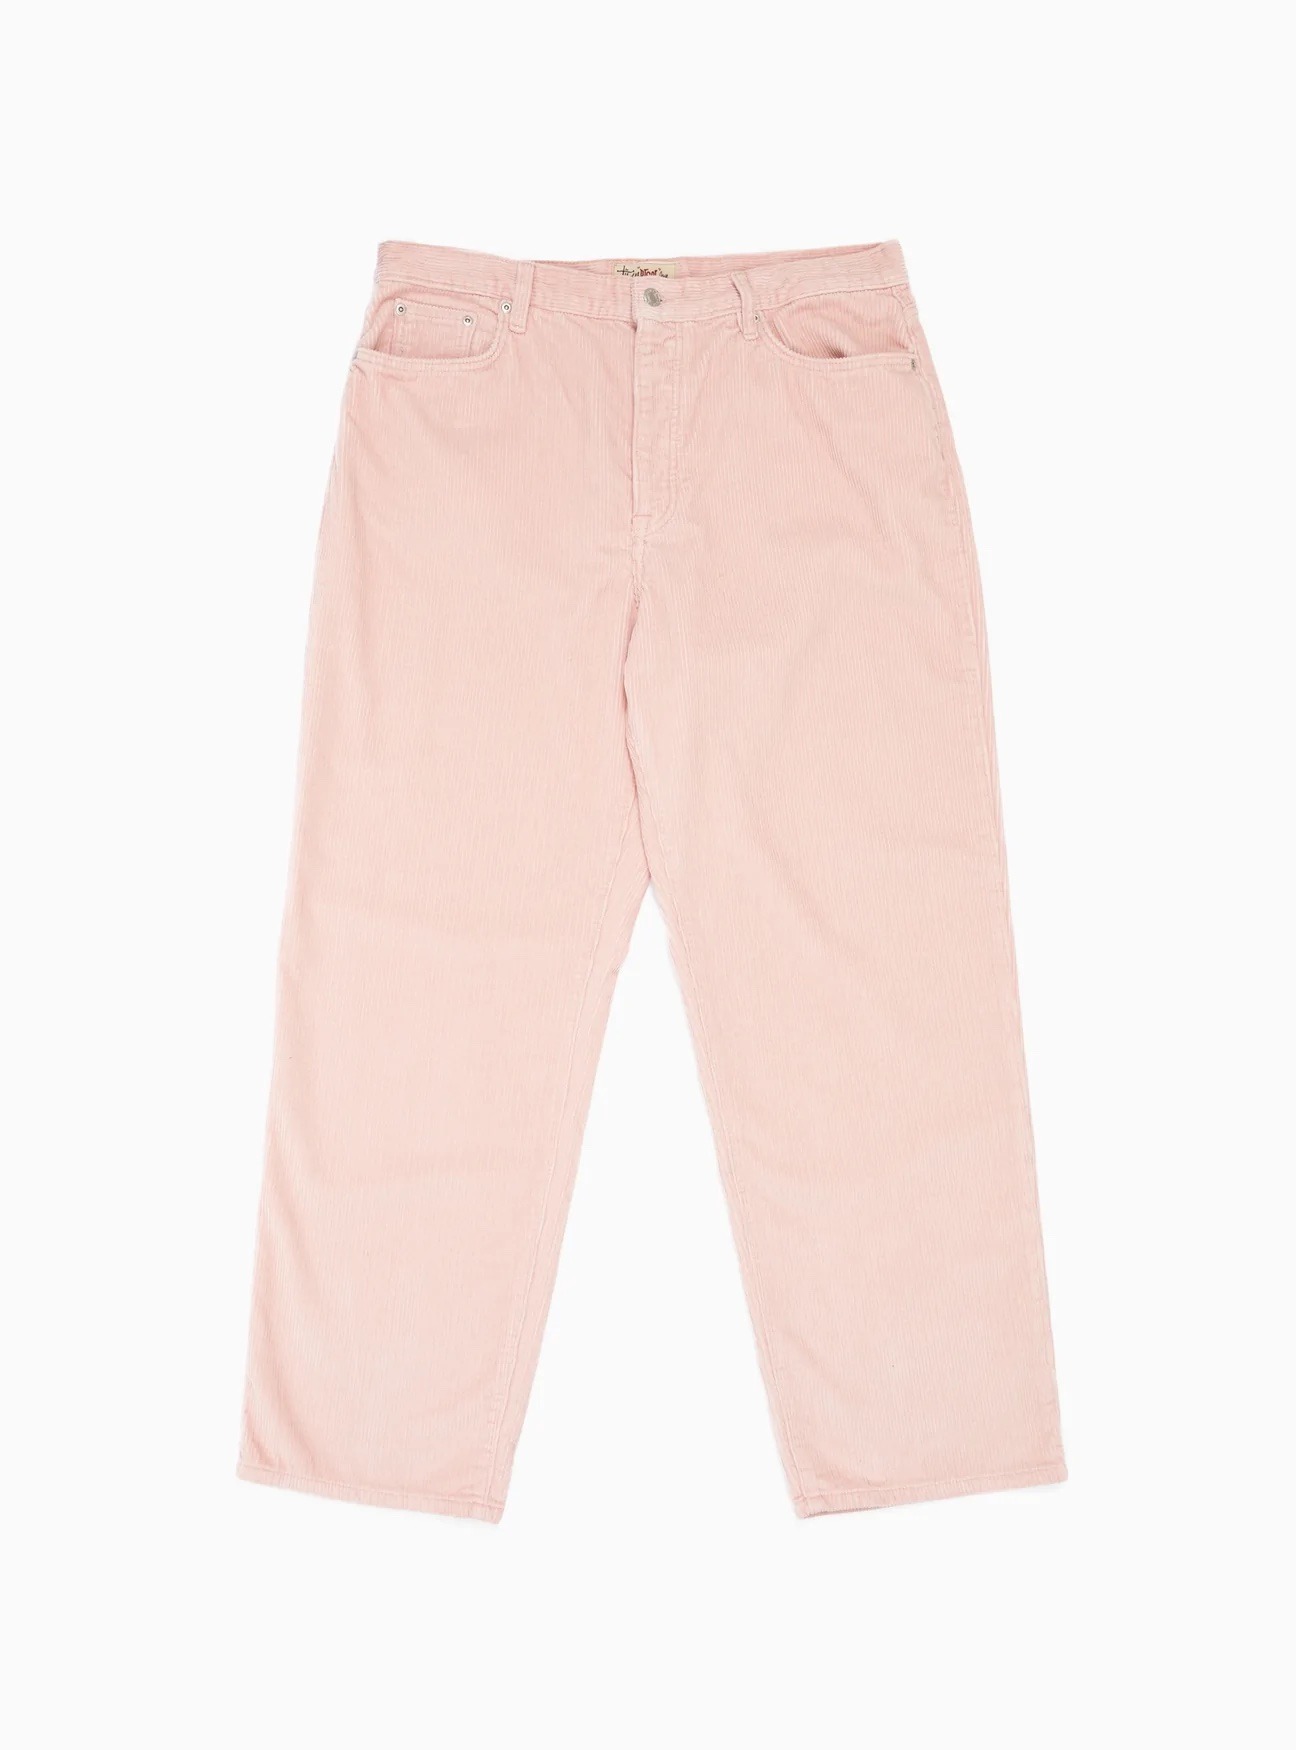 stussy pink corduroy trousers